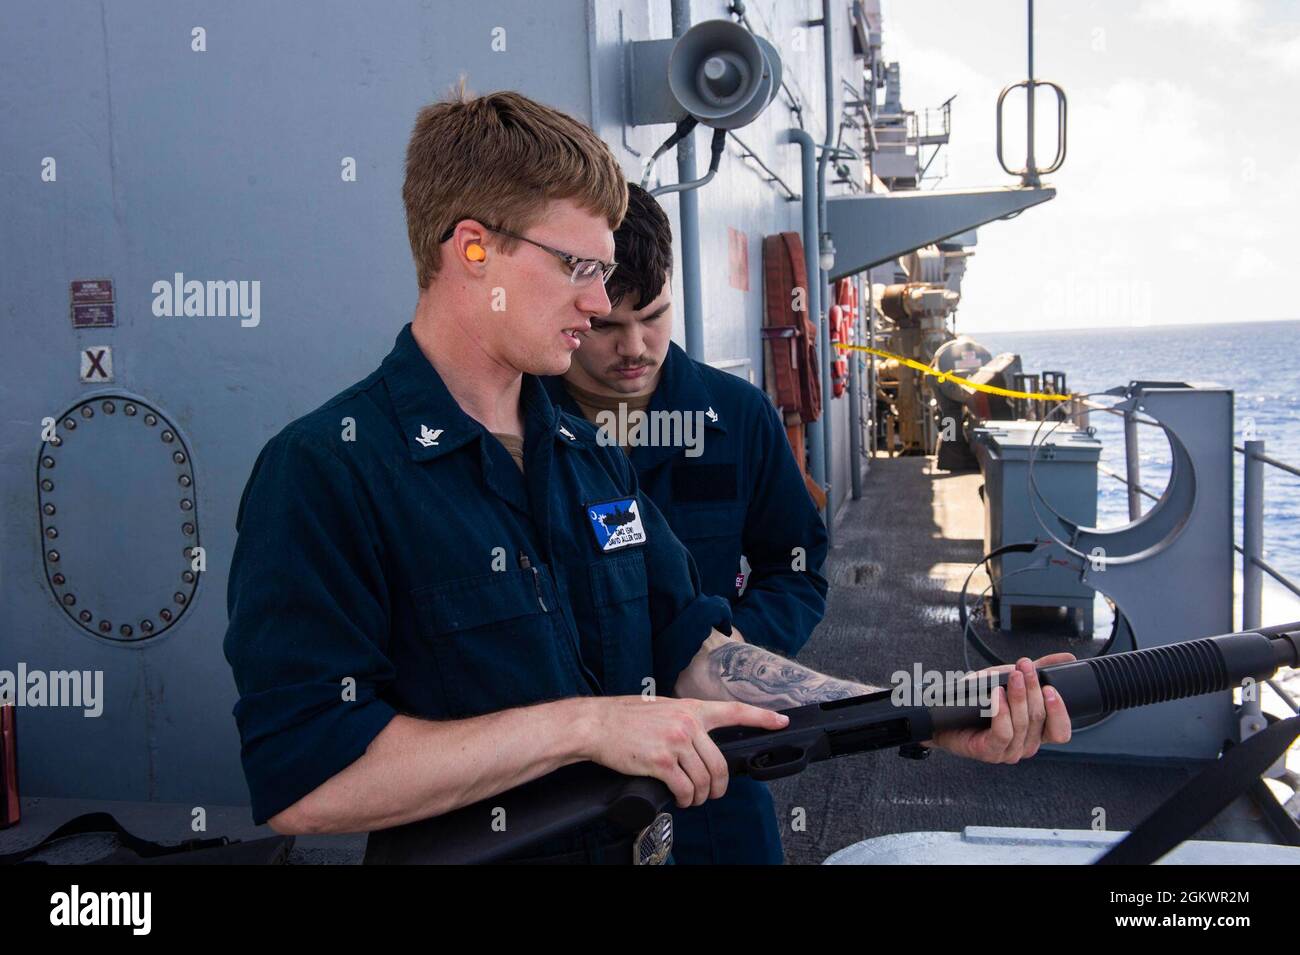 210712-N-RG587-1469 ATLANTIC OCEAN (July 12, 2021) Gunner's Mate 3rd Class David Cook, left, gives M500 shotgun training to Quartermaster 3rd Class Caleb Richards aboard the Ticonderoga-class guided-missile cruiser USS Vella Gulf (CG 72), during a small arms qualification course in the Atlantic Ocean, July 12. Vella Gulf is underway in the Atlantic Ocean conducting operations as part of the Dwight D. Eisenhower Carrier Strike Group. Stock Photo